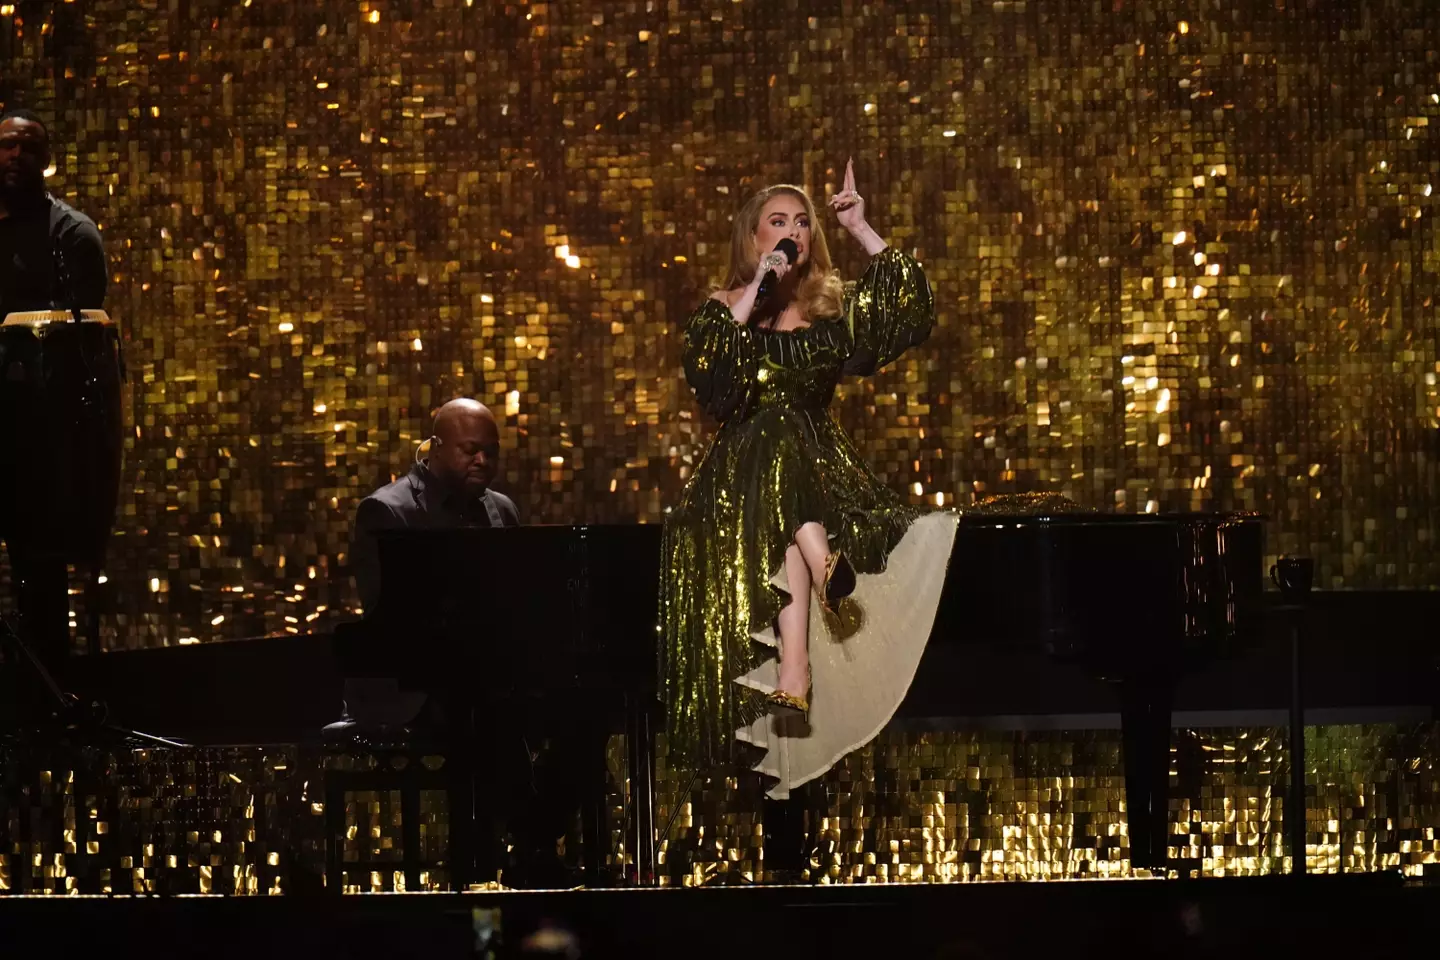 Adele reveals onstage she got diagnosed with 'jock itch' from sweating in  Spanx